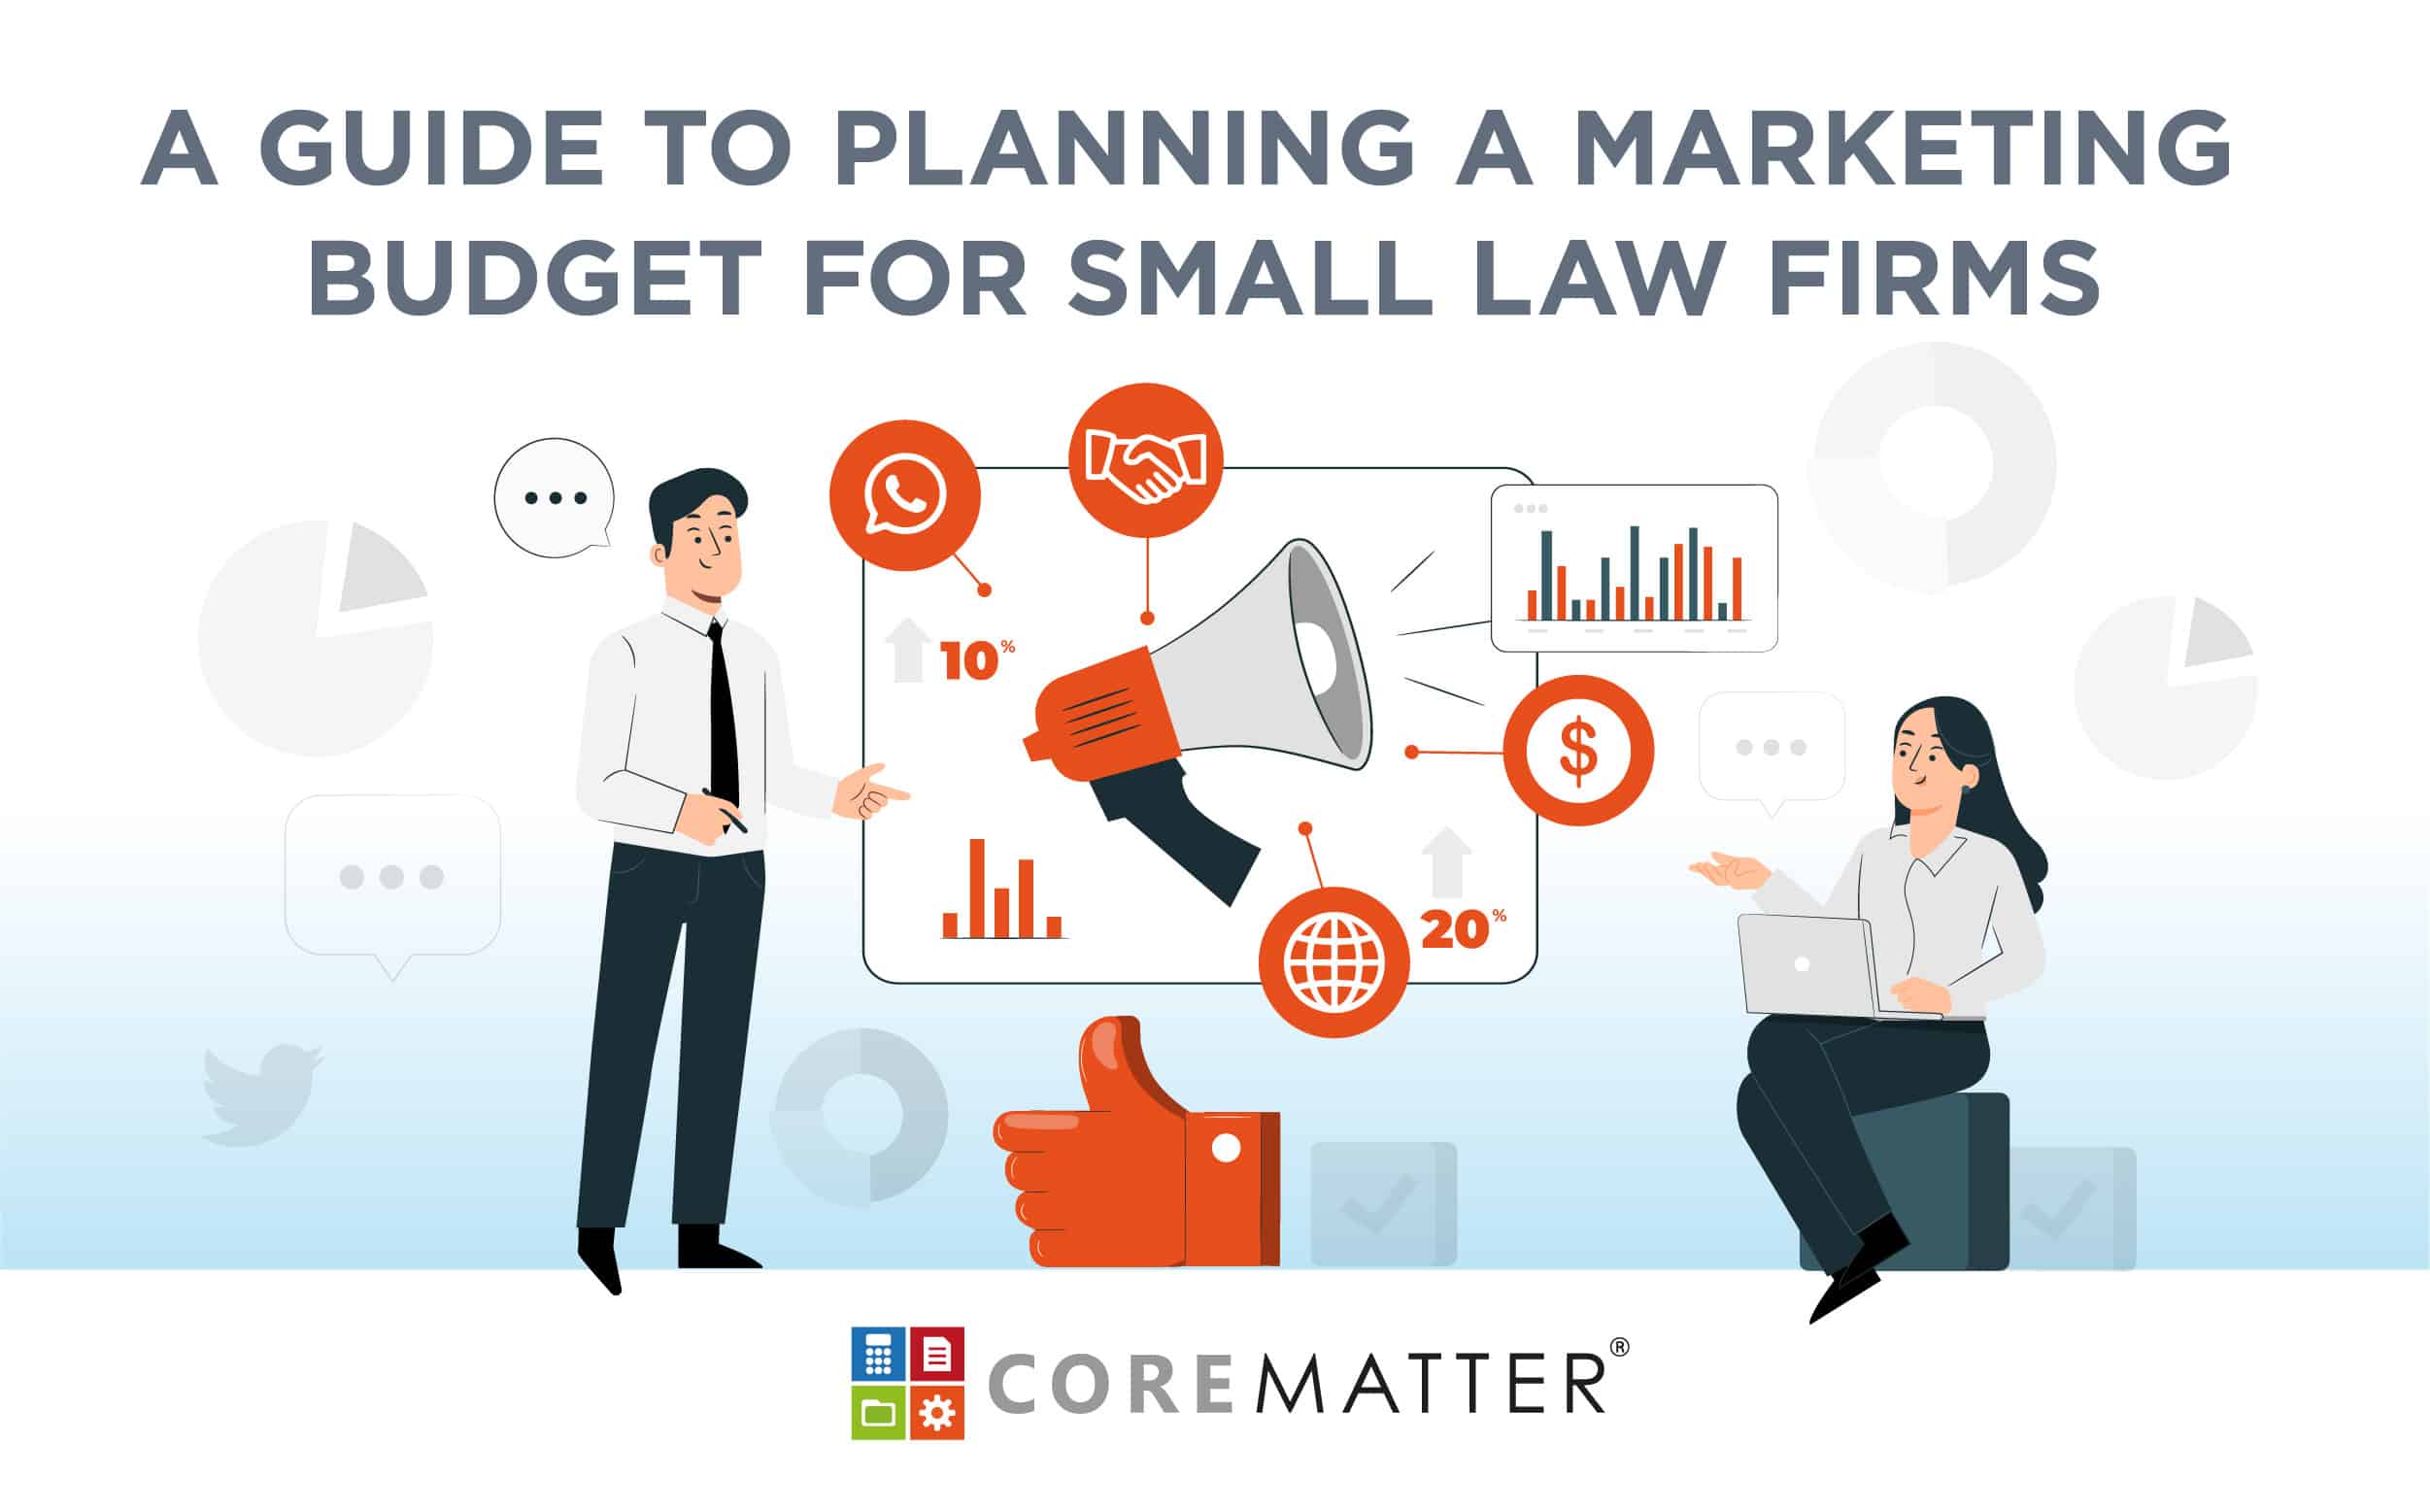 A Guide To Planning A Marketing Budget for a Small Law Firm